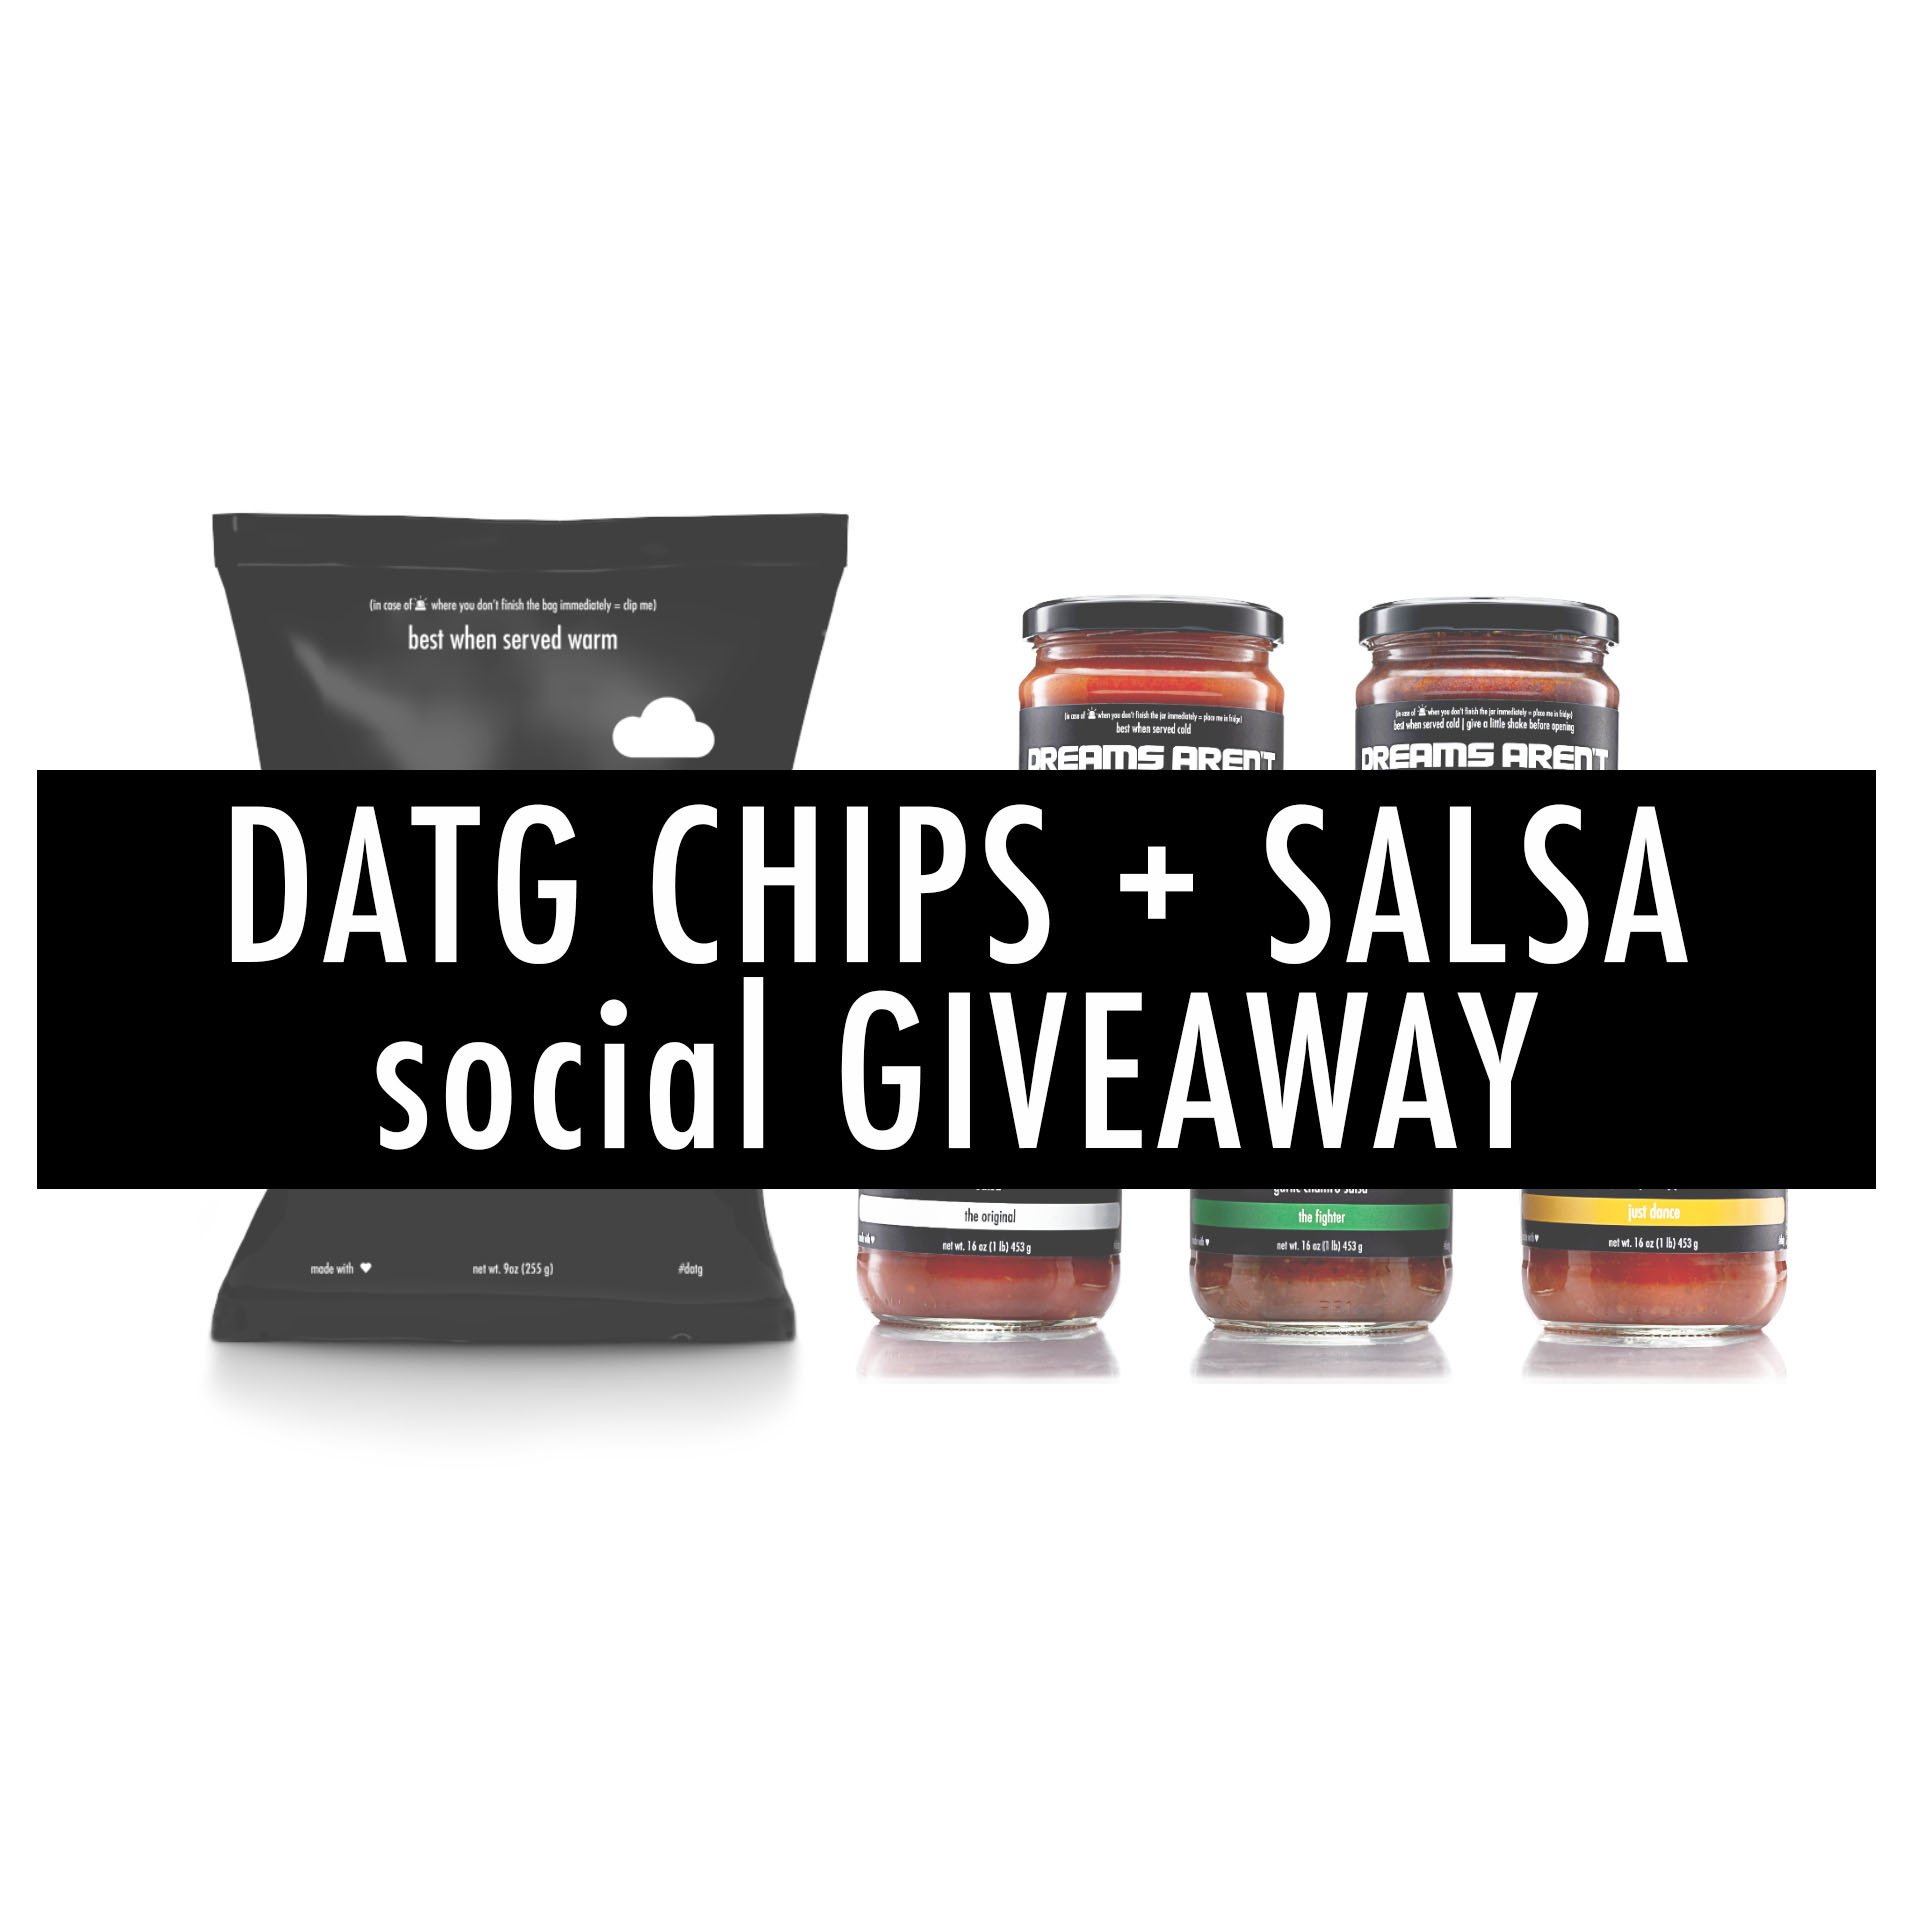 $2500 WORTH OF CHIPS + SALSA Giveaway